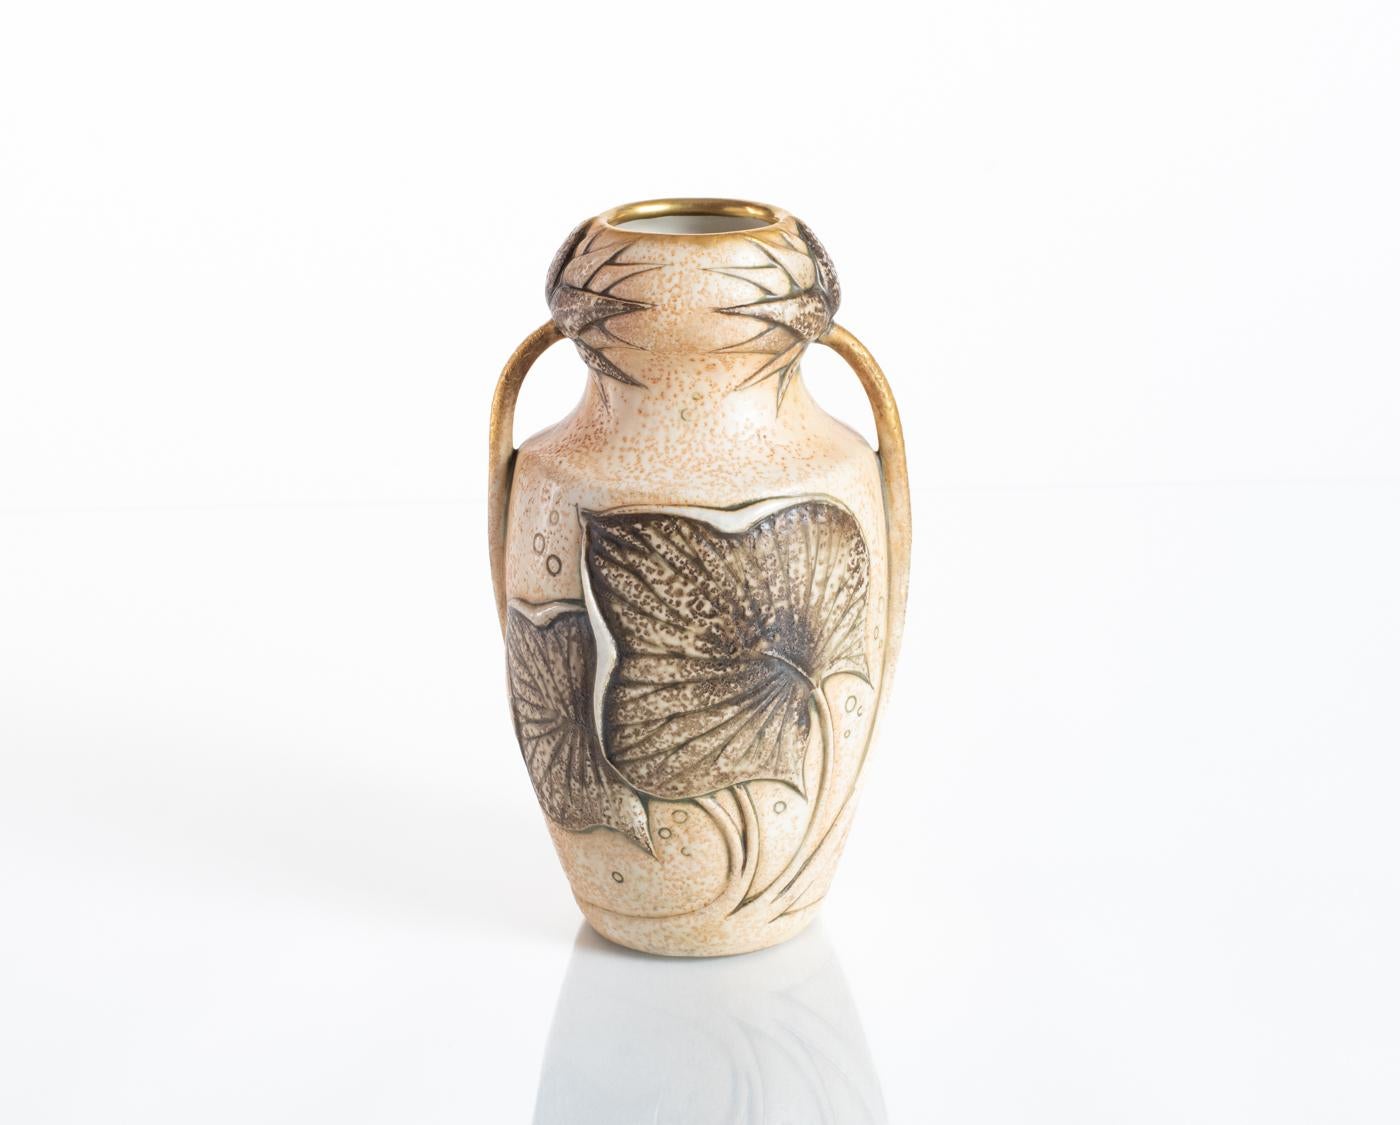 Amphora Vase with Water Lilies by Ernst Wahliss, att. Paul Dachsel, c. 1900